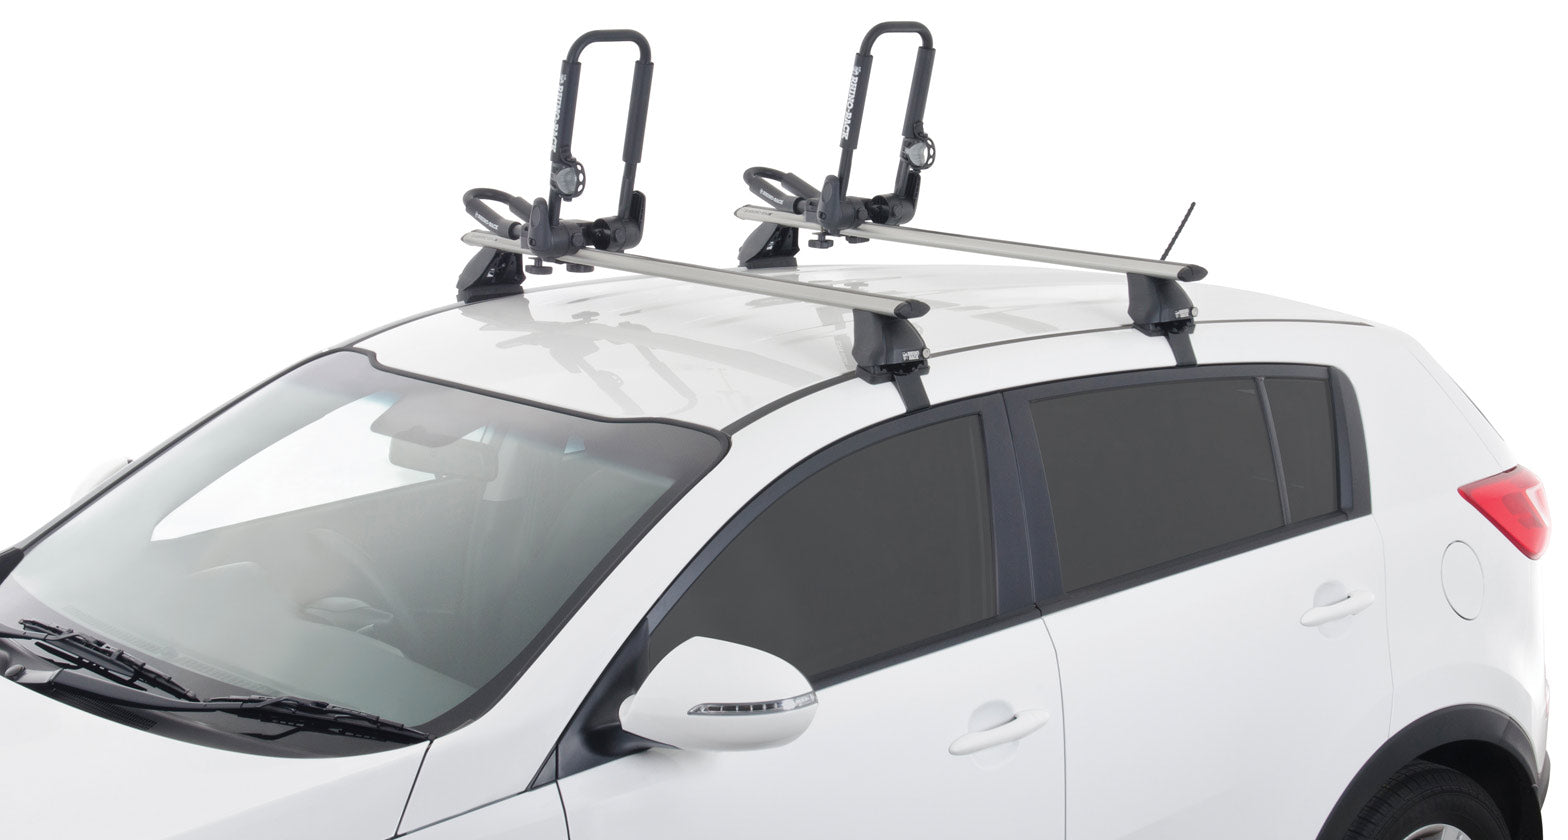 Rhino Rack Kayak Holder, foldable - suitable for almost all crossbars (S512)